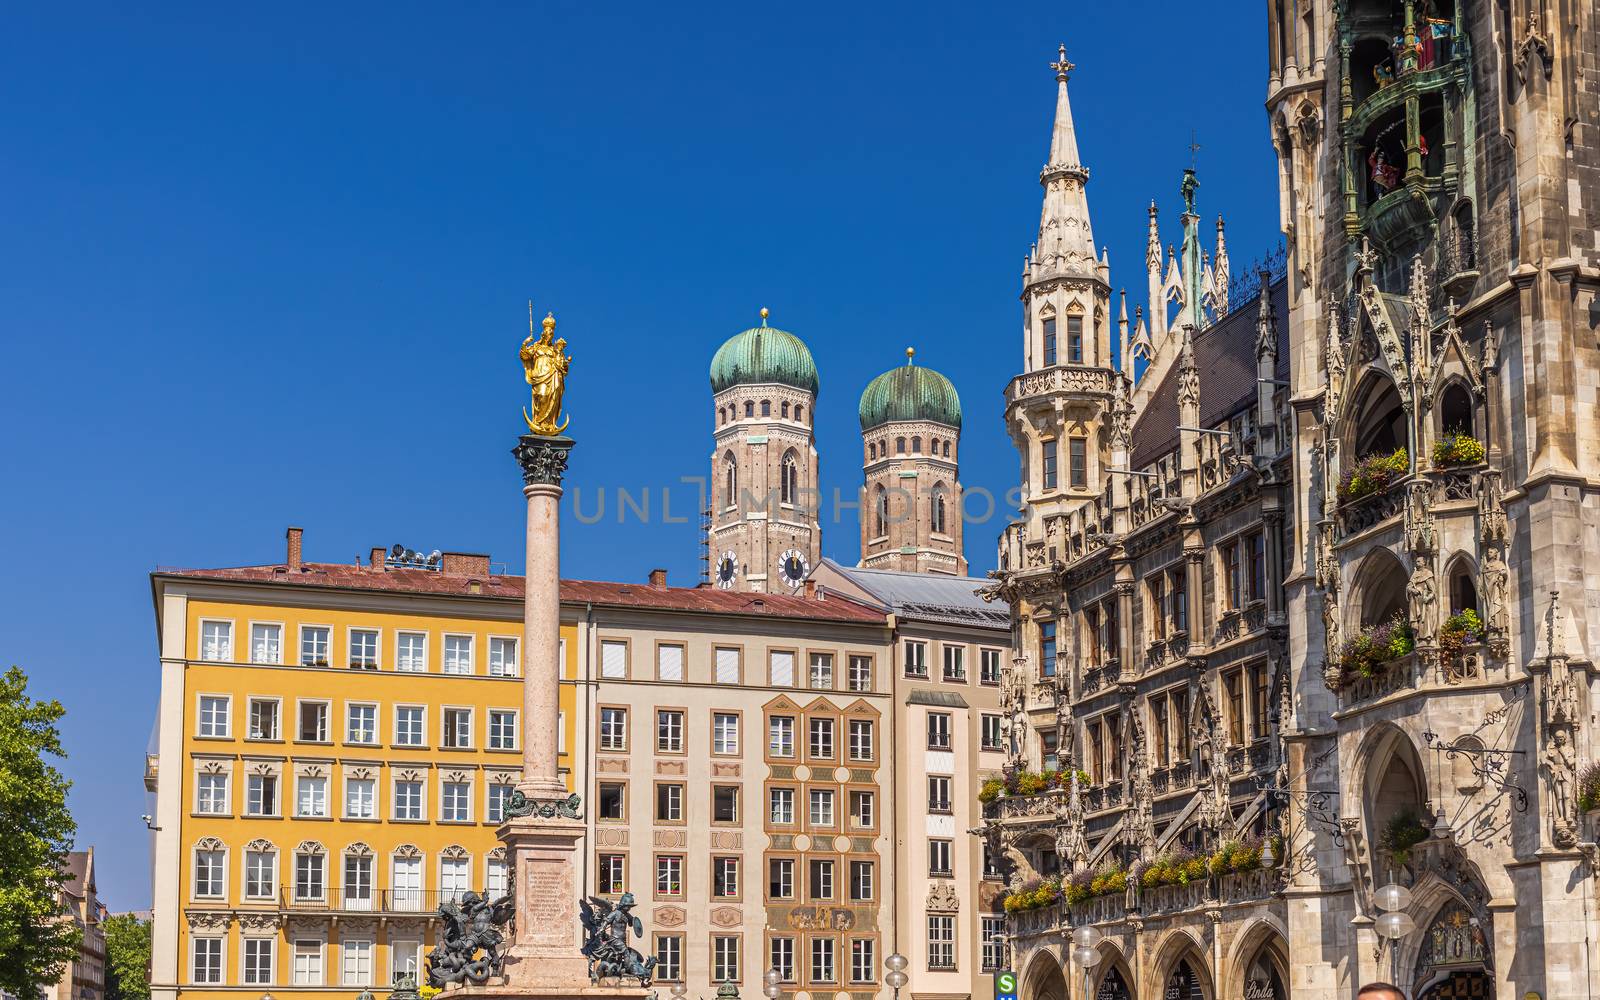 Frauenkirche and New Town Hall in Munich, Germany by COffe